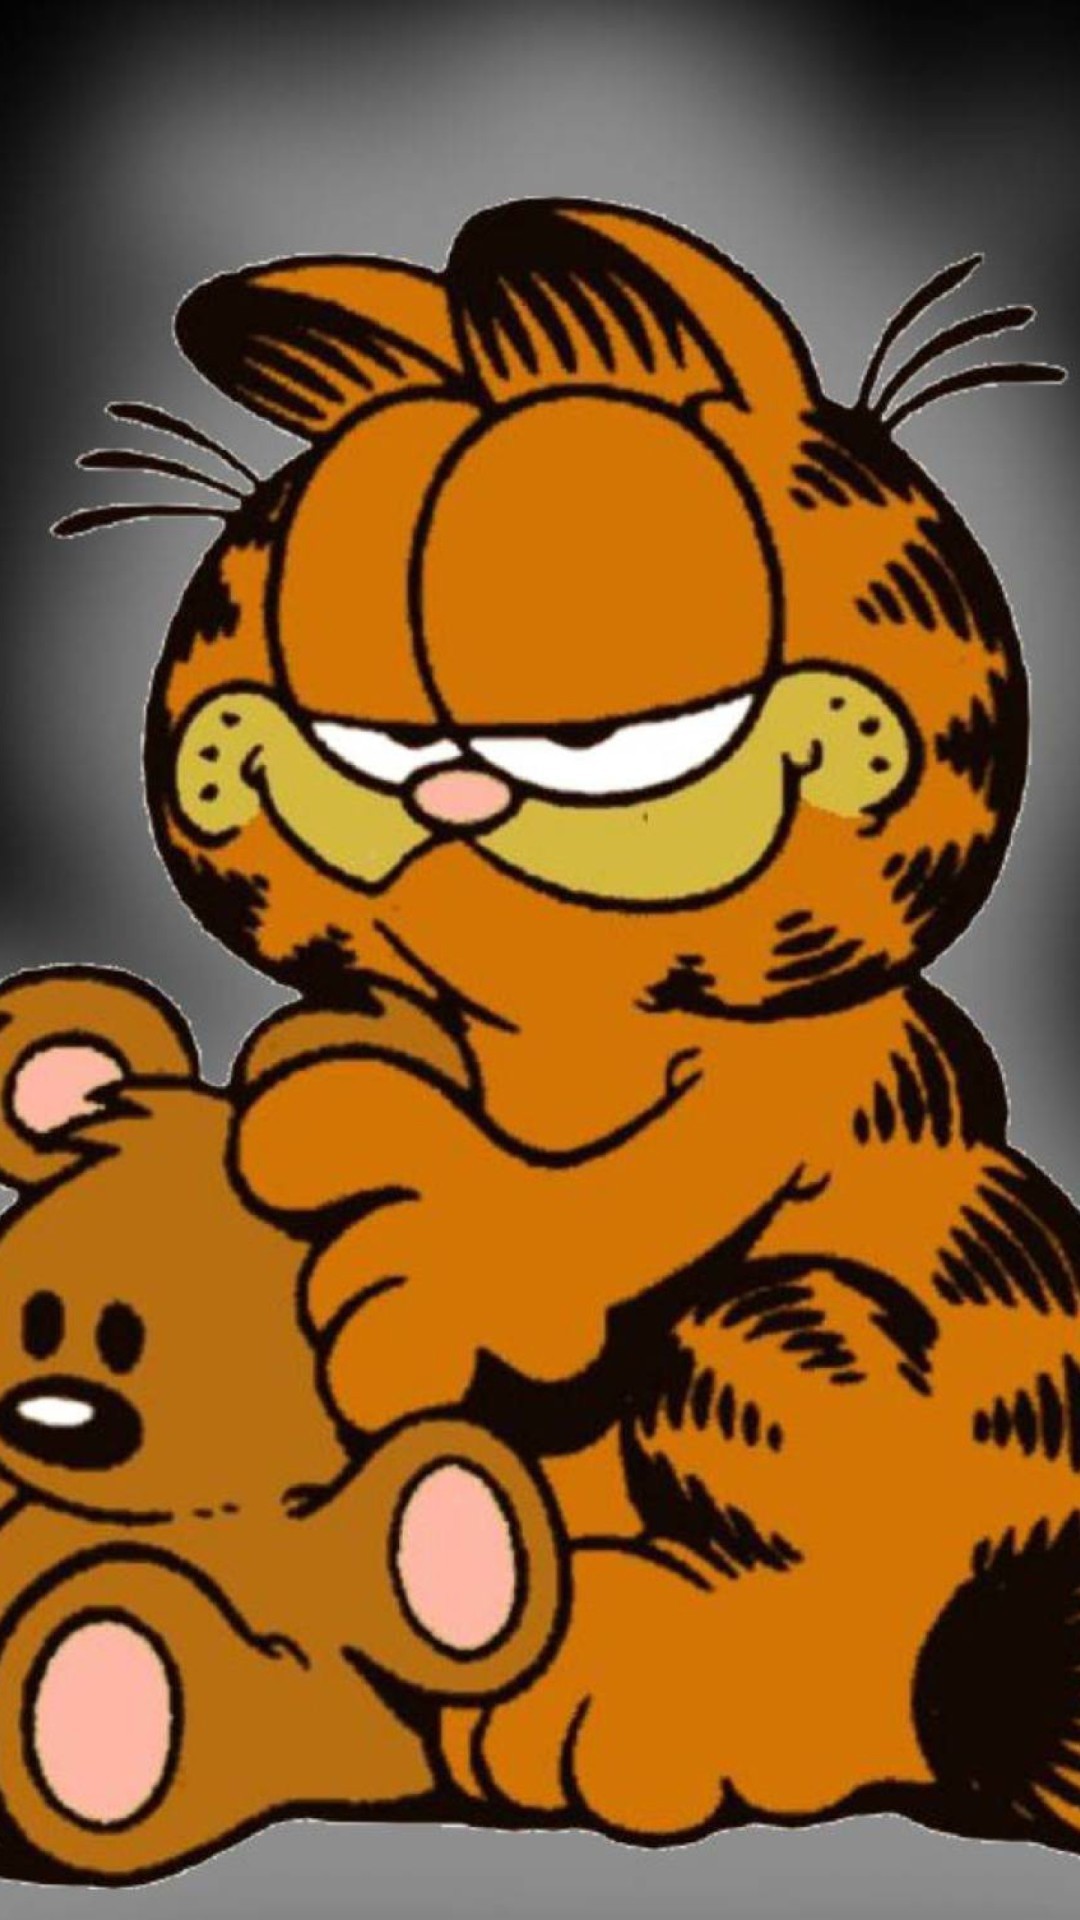 Garfields Monday Morning Wallpaper for iPhone 5